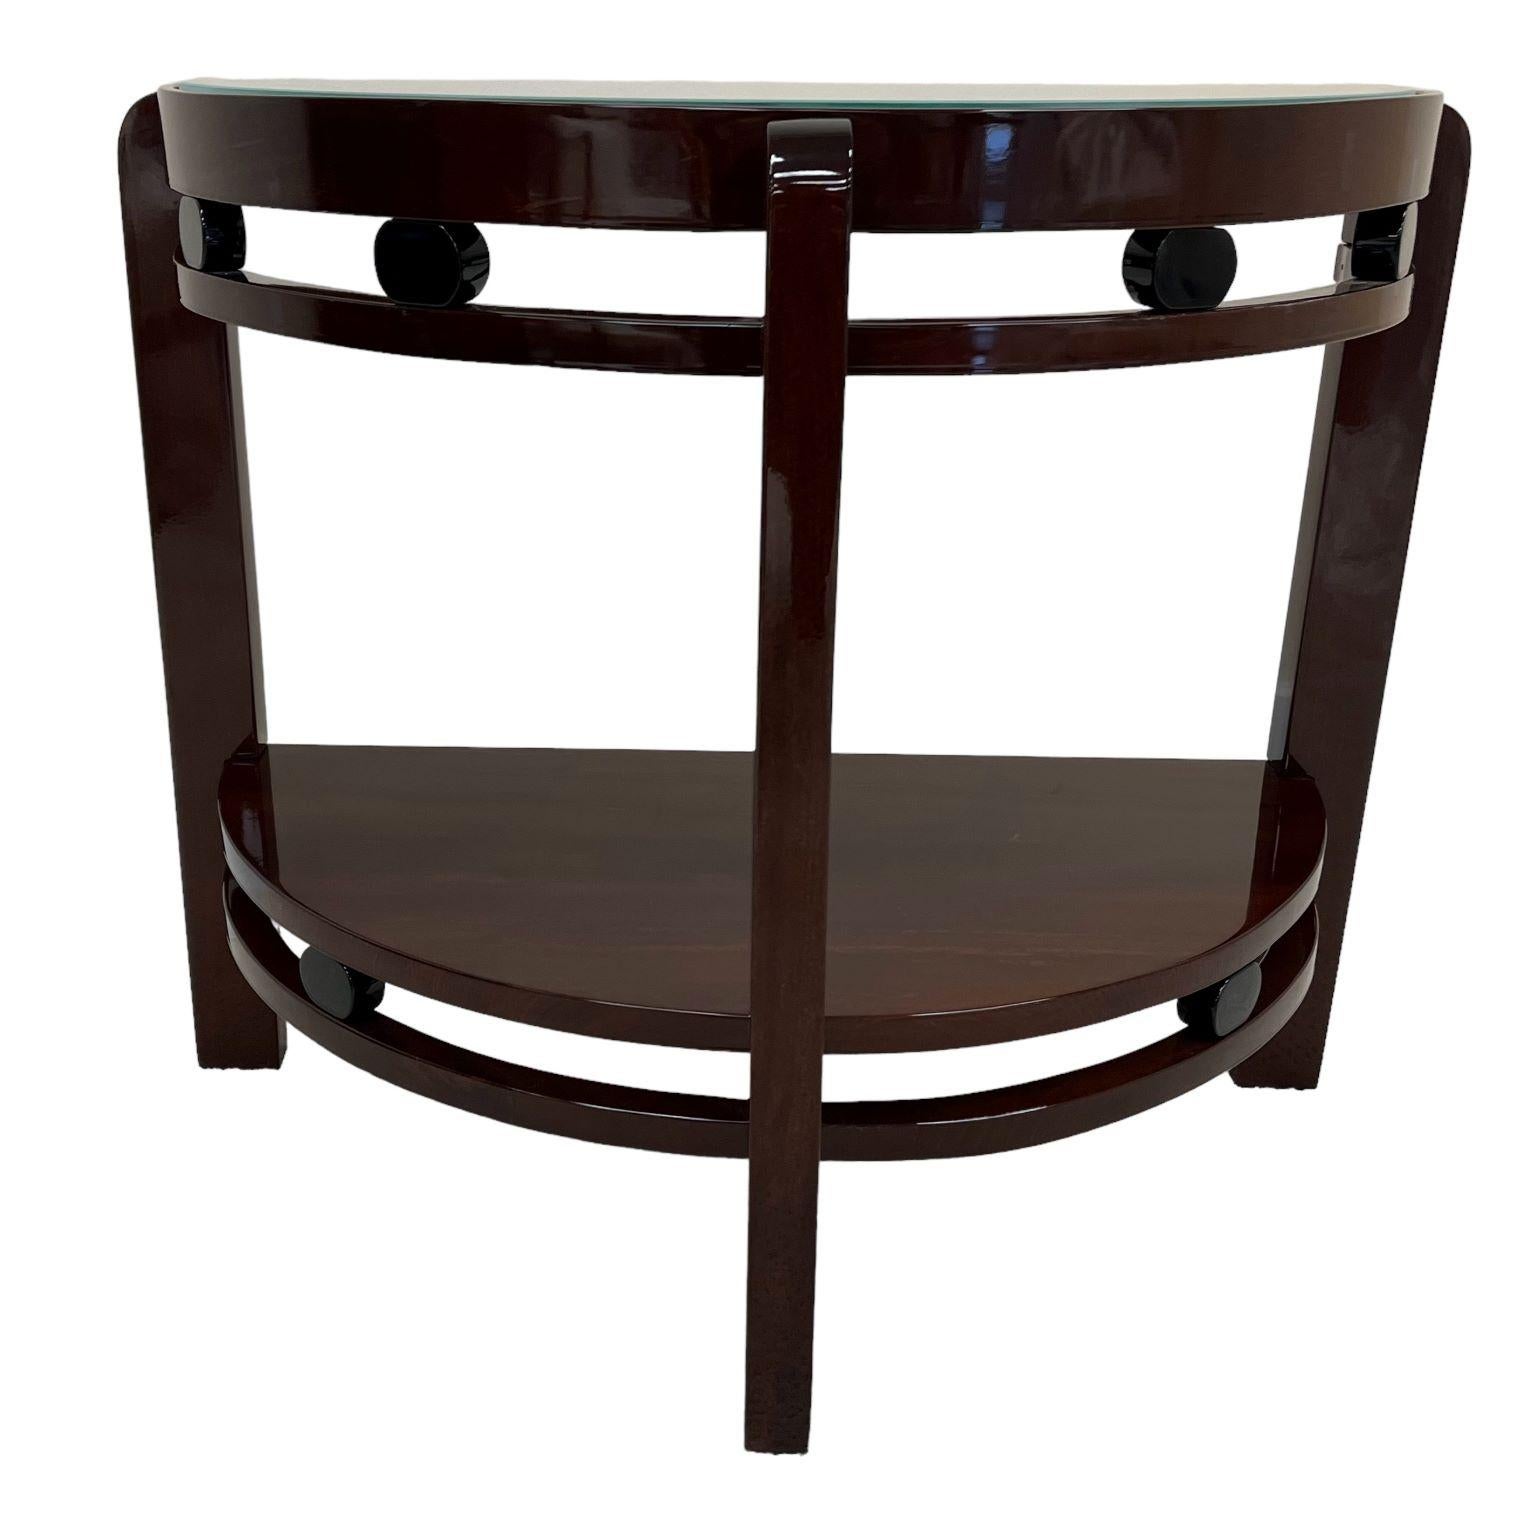 Mid-20th Century Remarkable Half Circle Machine Age Art Deco Side Table American C. 1930’s For Sale